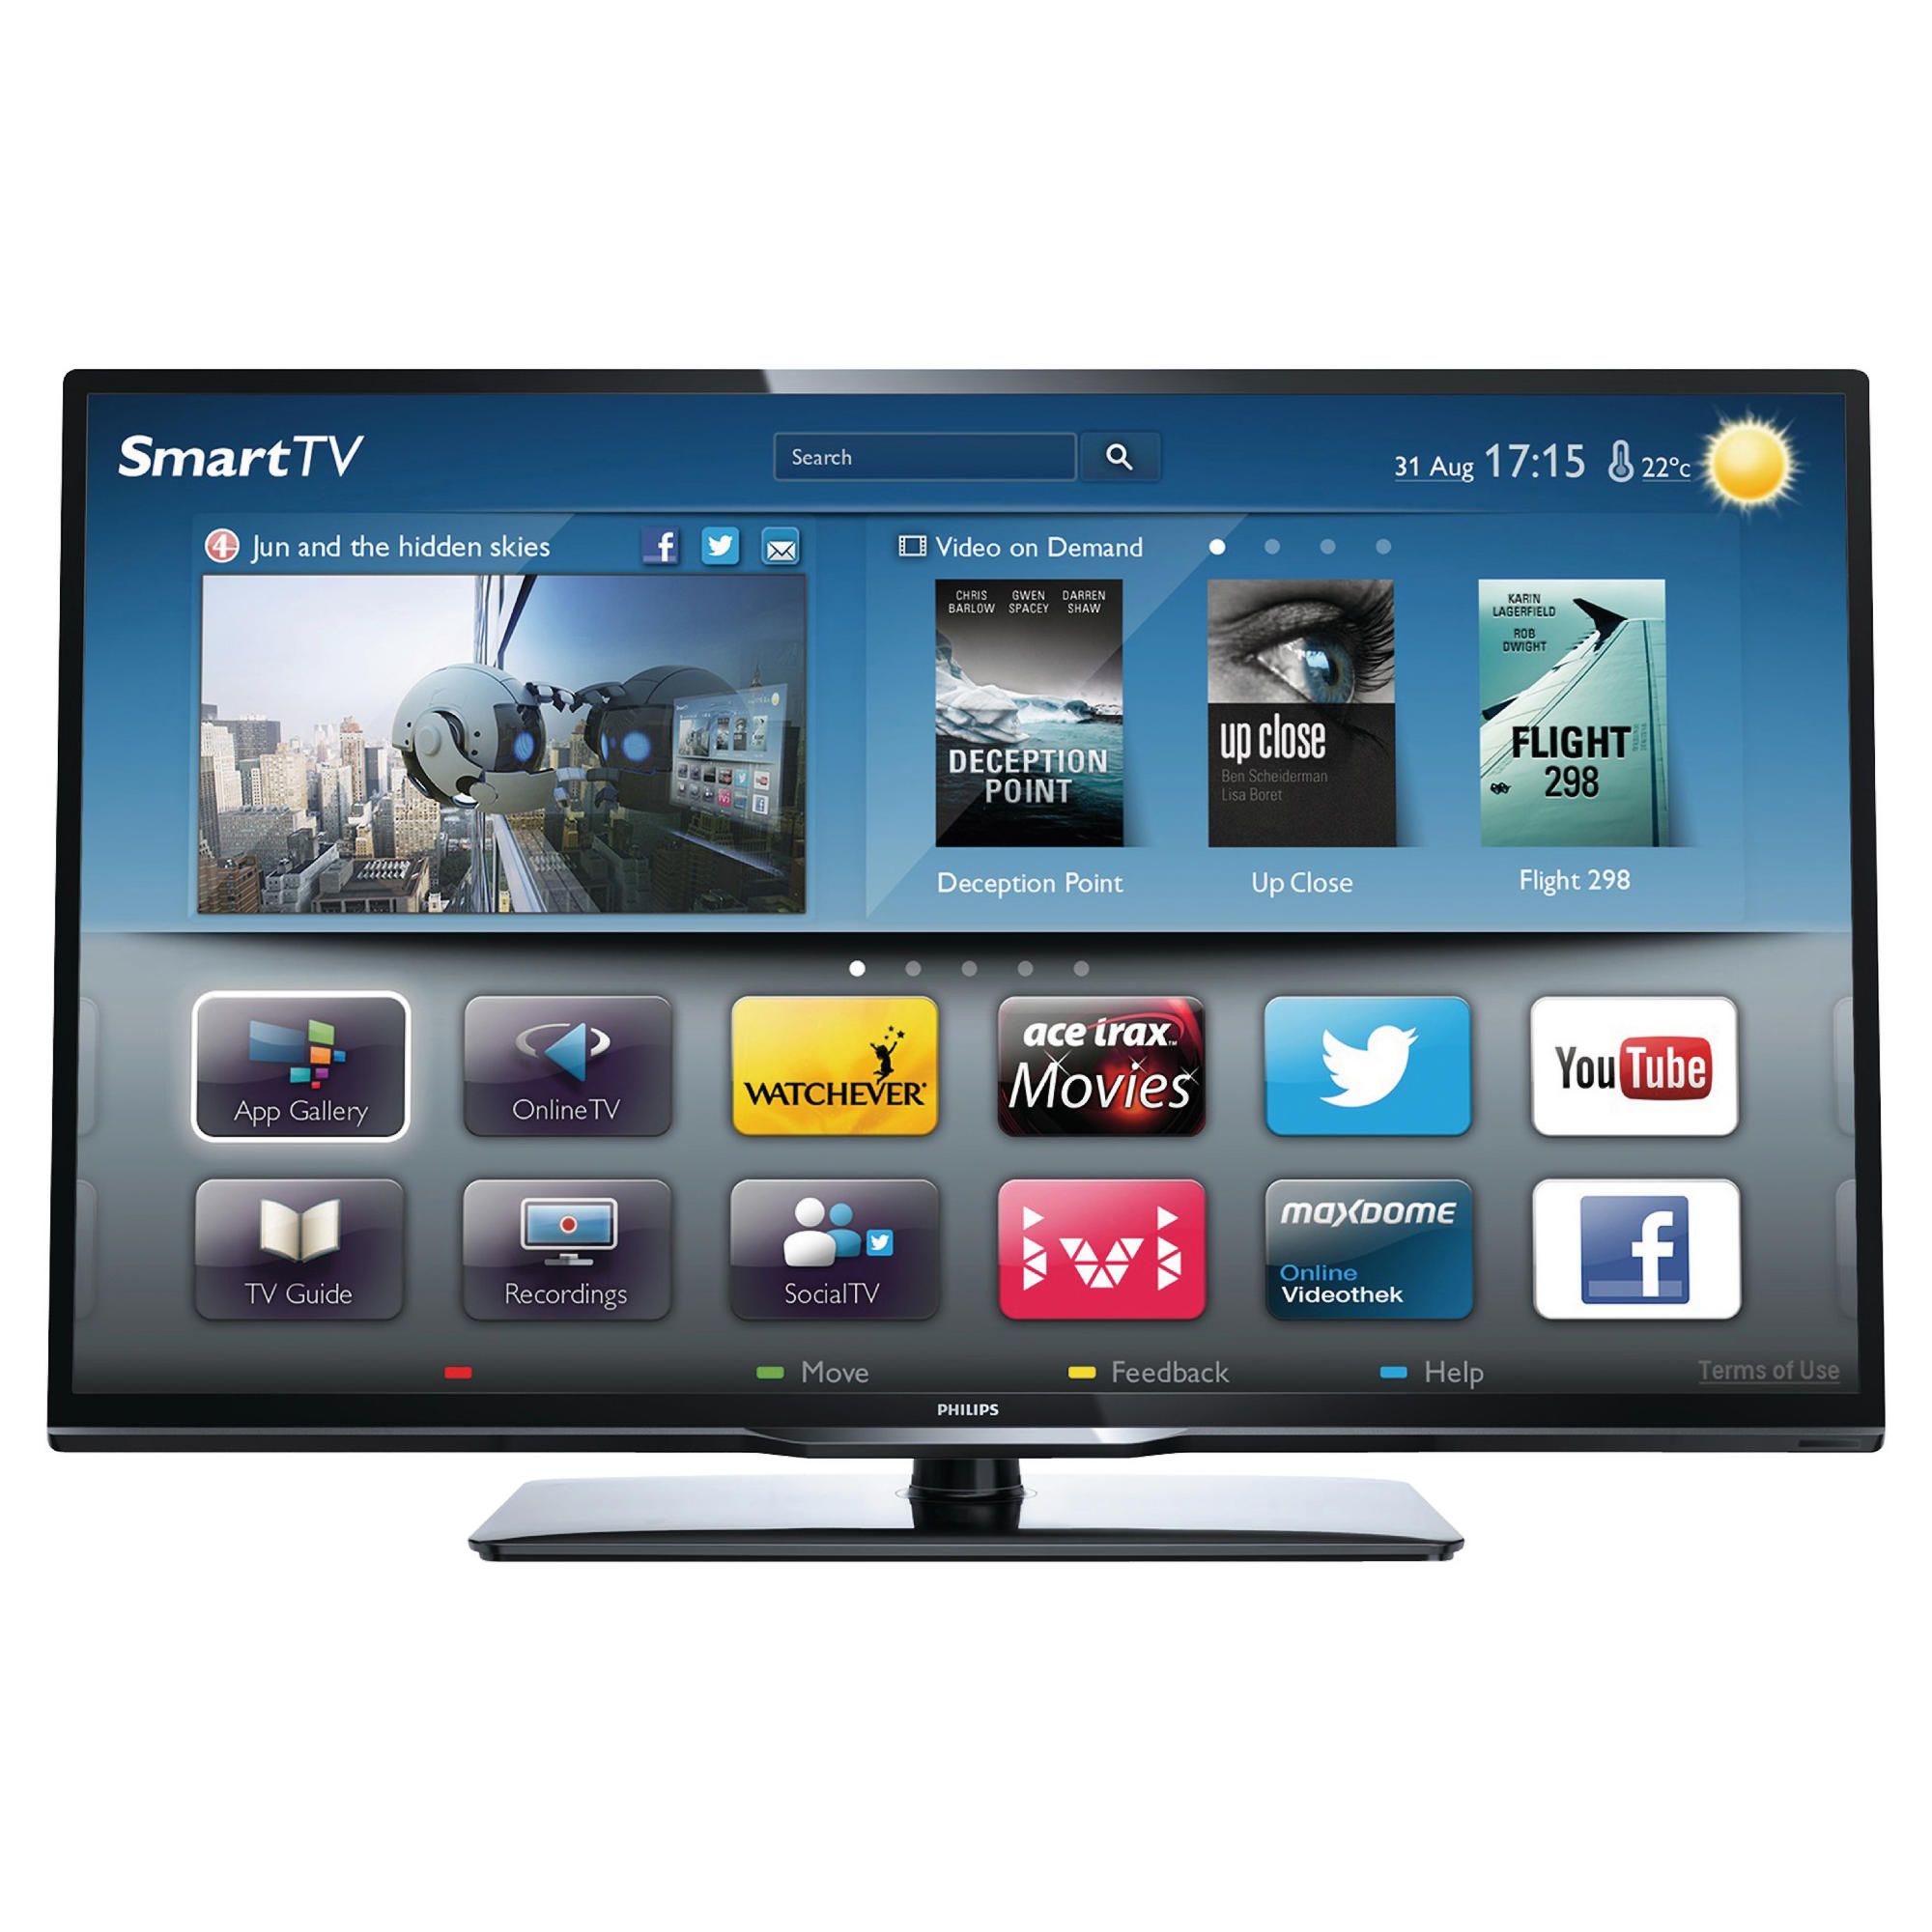 Philips 46PFL3208 46 Inch Full HD 1080p LED Smart TV with Freeview HD